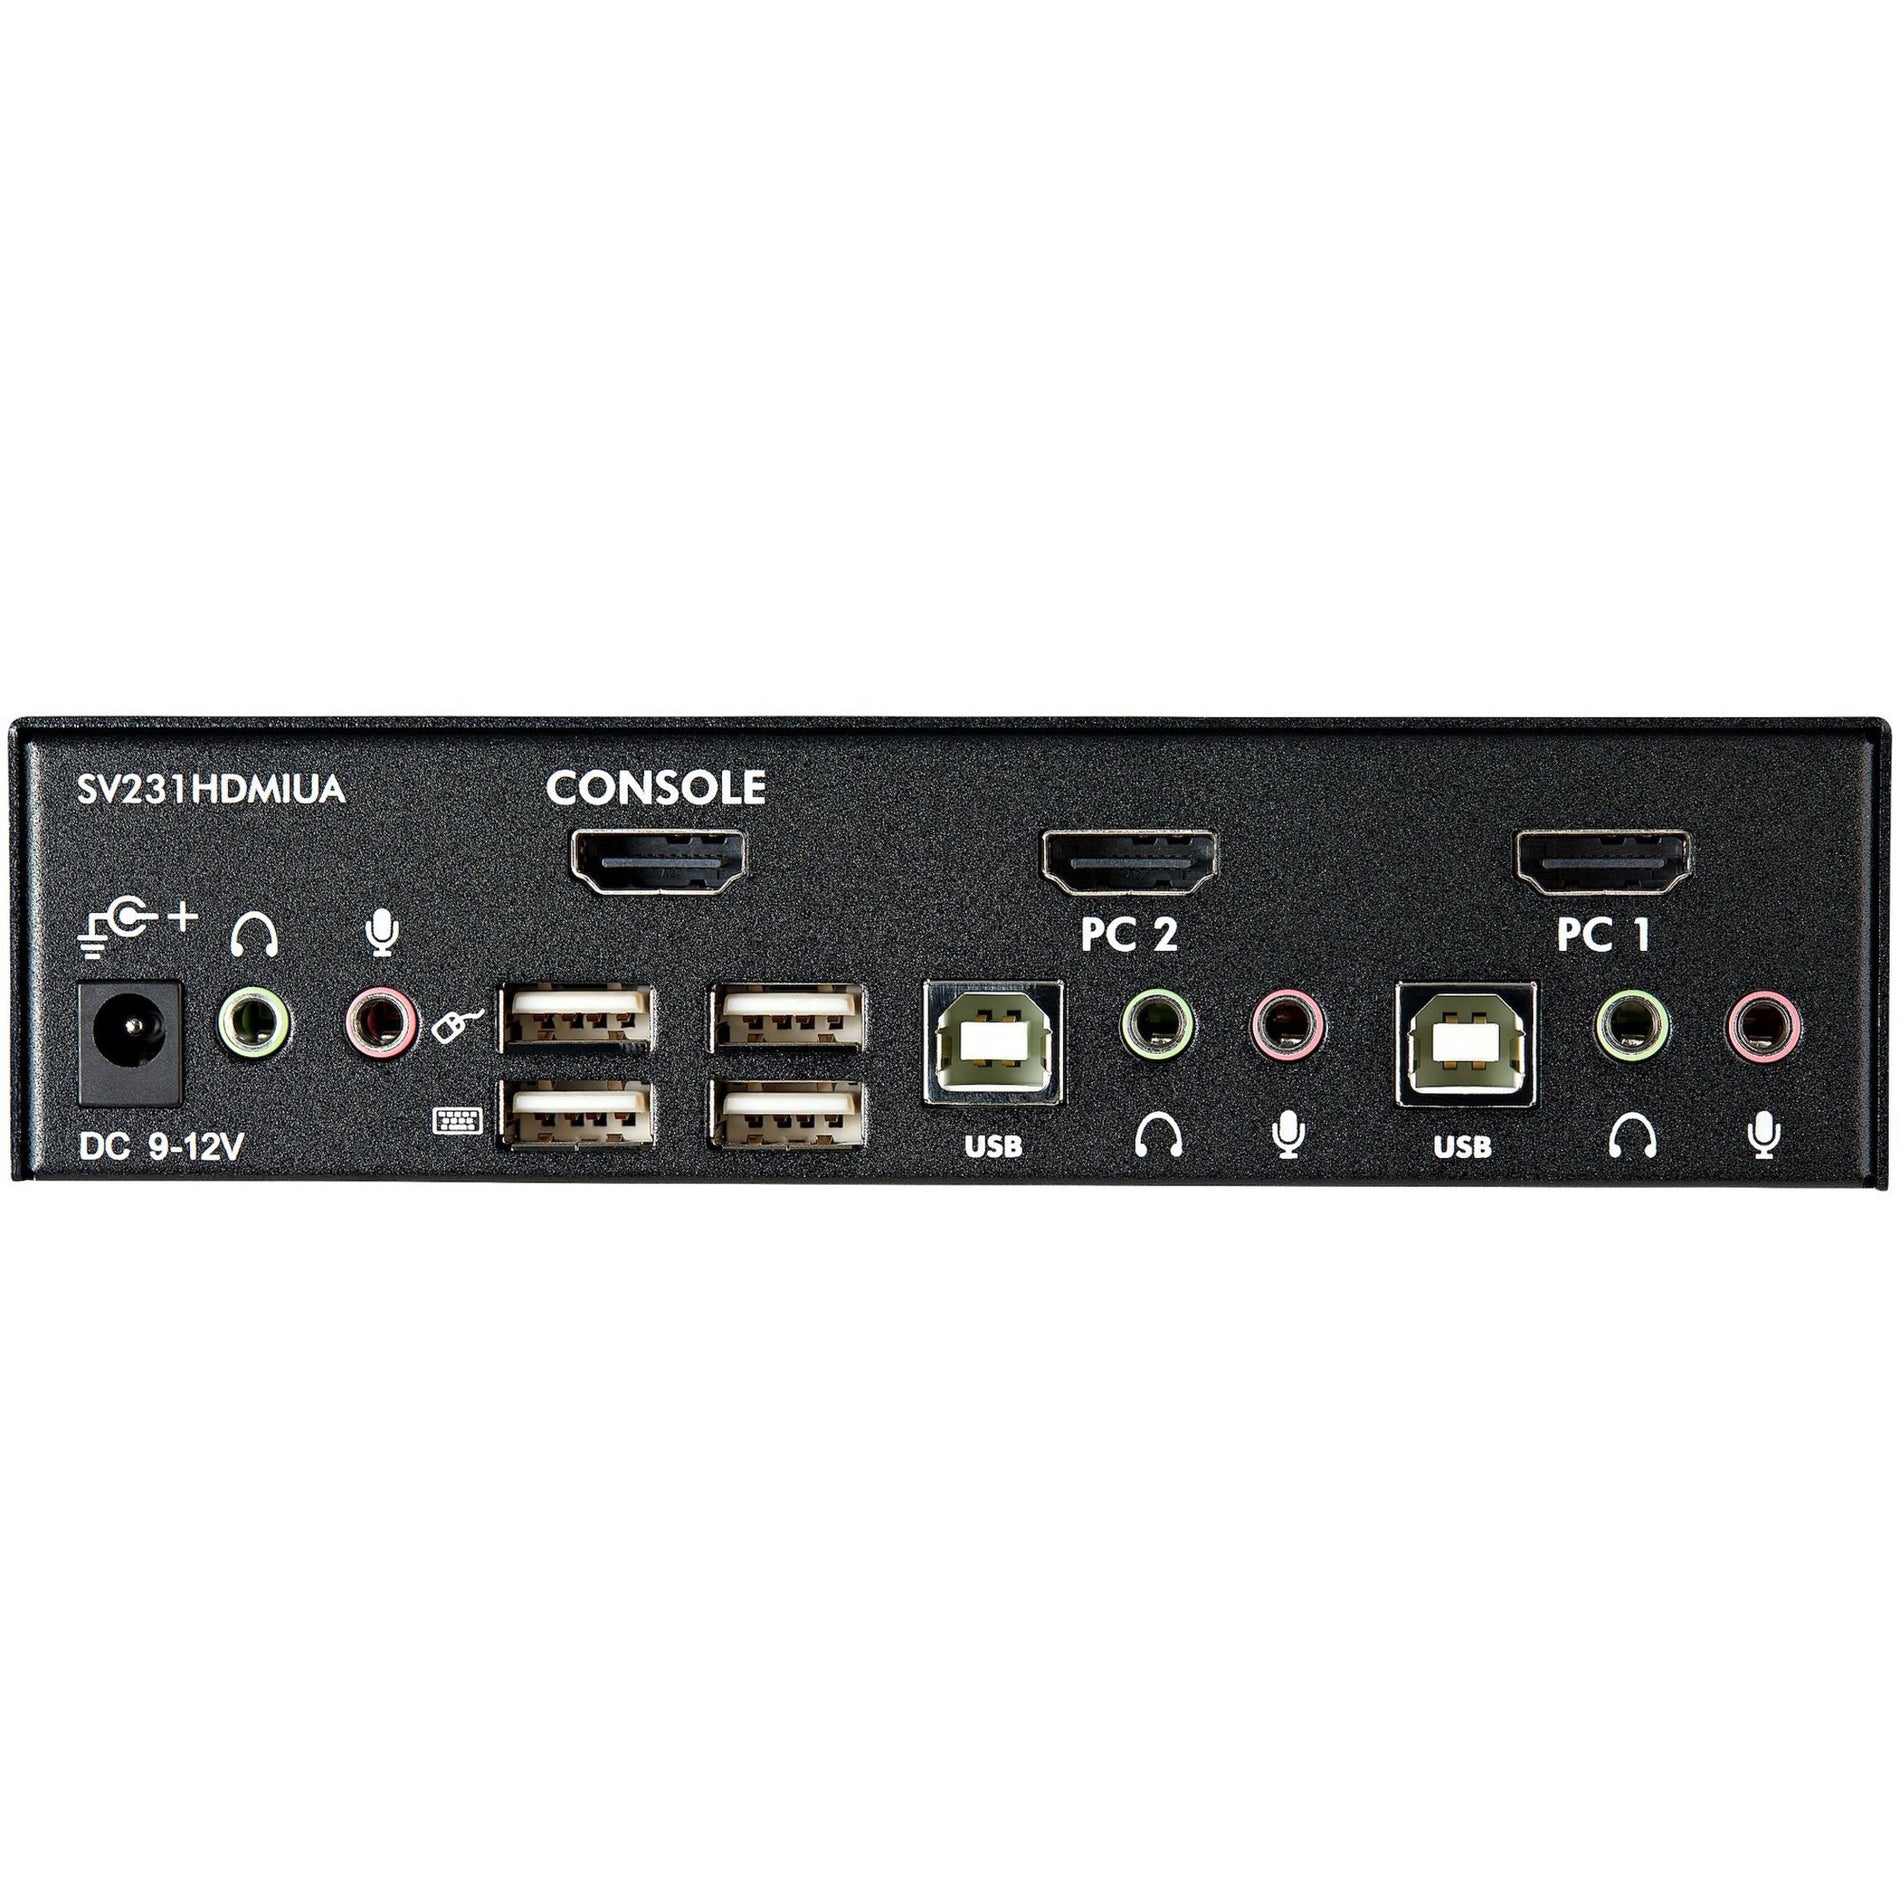 StarTech.com SV231HDMIUA 2-Port USB HDMI KVM Switch with Audio and USB 2.0 Hub, Share Peripherals and Display Between Game Console and PC